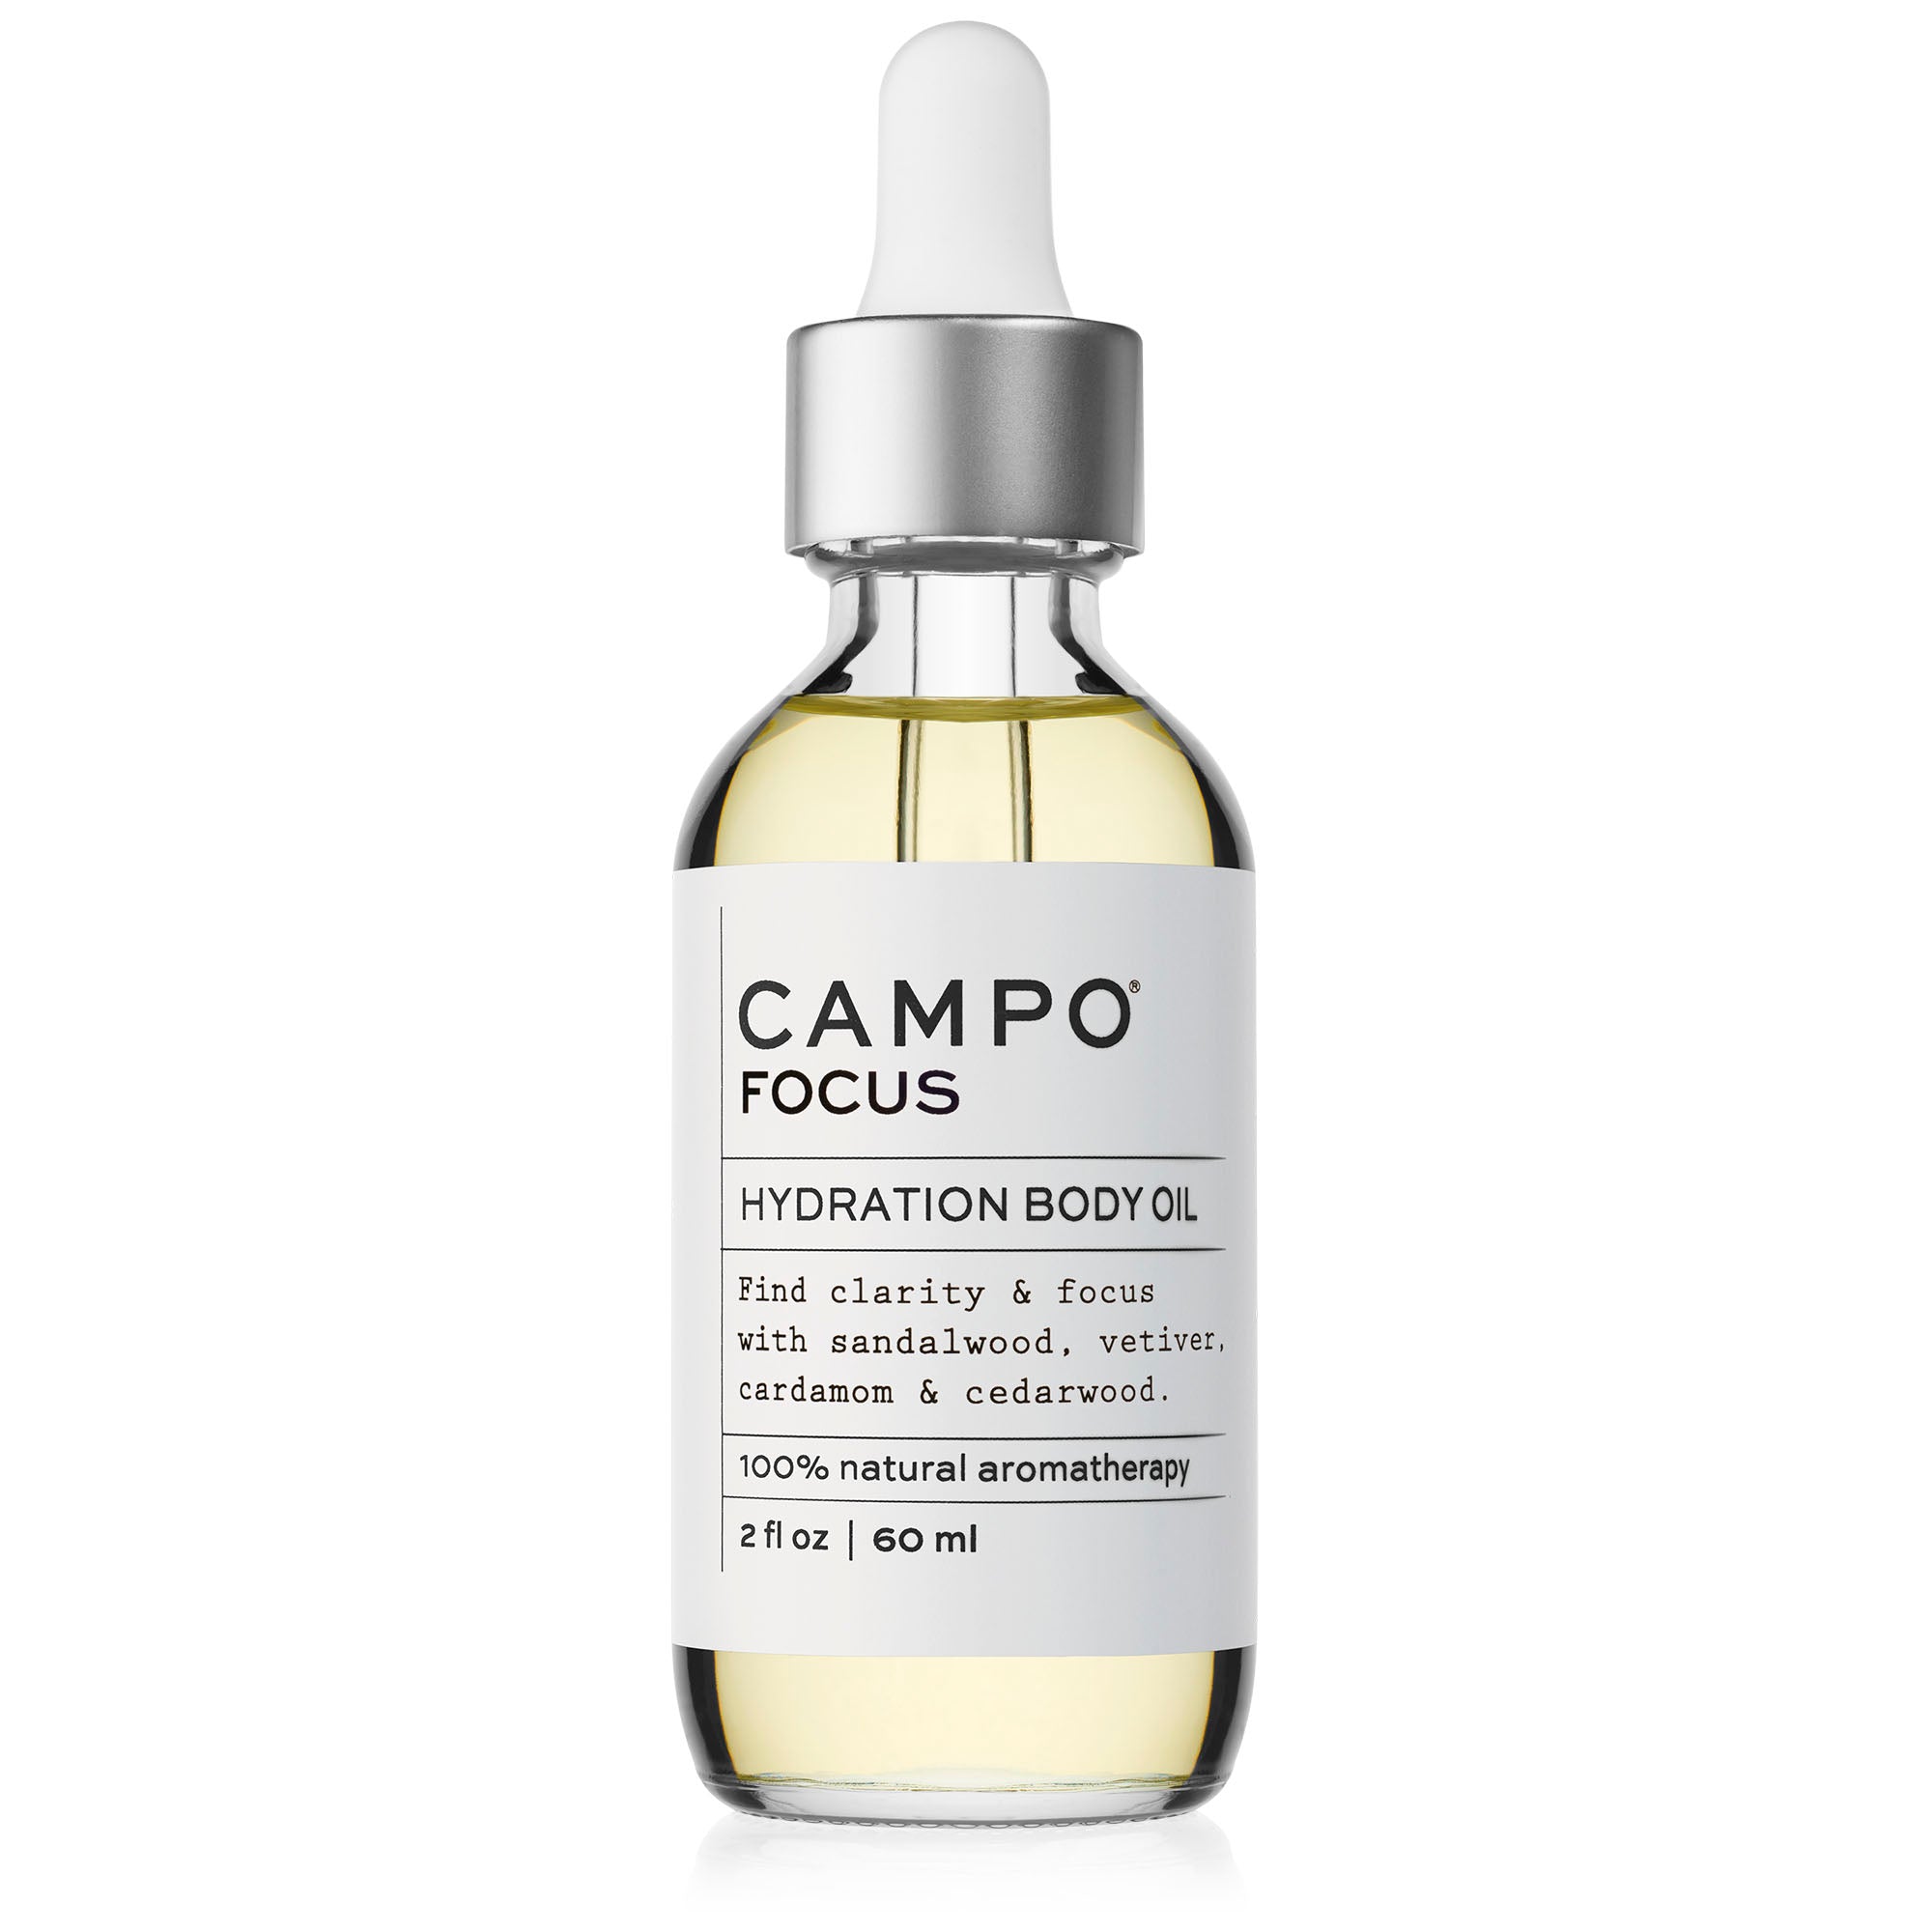 Campo Beauty Hydration Belly Oil - FOCUS Blend that in 60 ml. Inspires feelings of peace and tranquility to promote heightened awareness and mental clarity.  Gives your skin an instant glow and an infusion of nourishing and deep hydration. A grounding blend of 100% pure essential oils of warm, woodsy Australian Sandalwood, Cardamom, Cedarwood Atlas, Vetiver, Italian Neroli Orange Blossom, Cedarwood Himalayan, and Amyris.